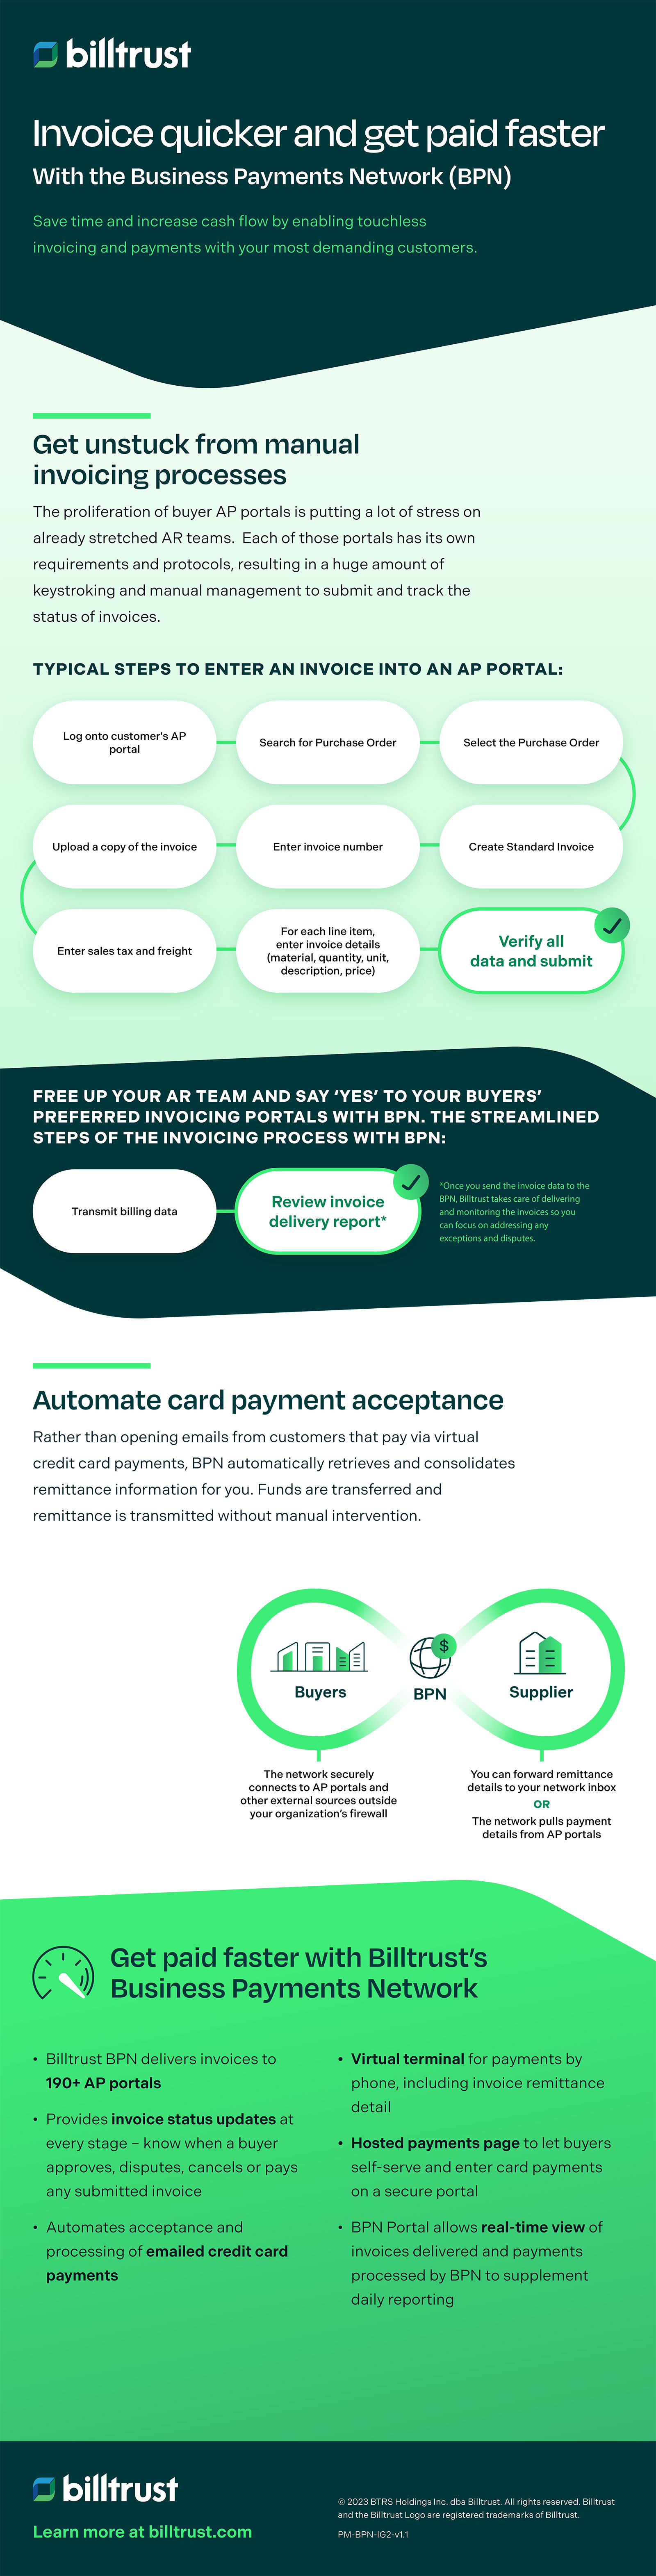 Invoice quicker and get paid faster BPN Infographic